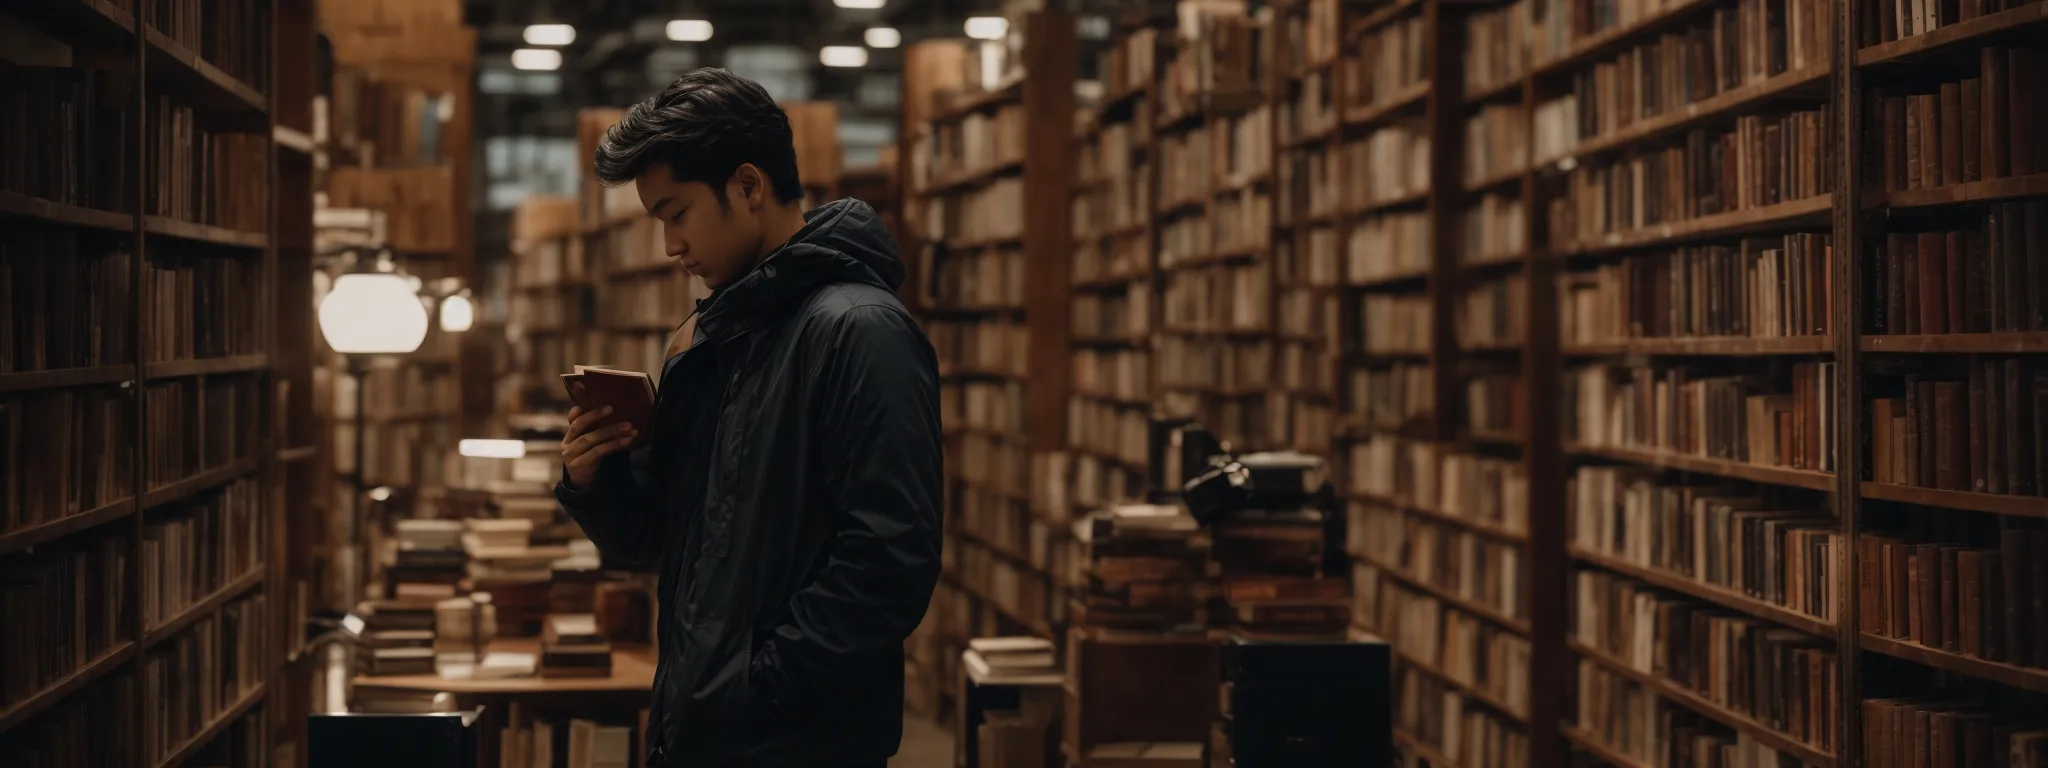 a content creator gazes at a vast library of books, symbolizing a treasure trove of ideas and knowledge.